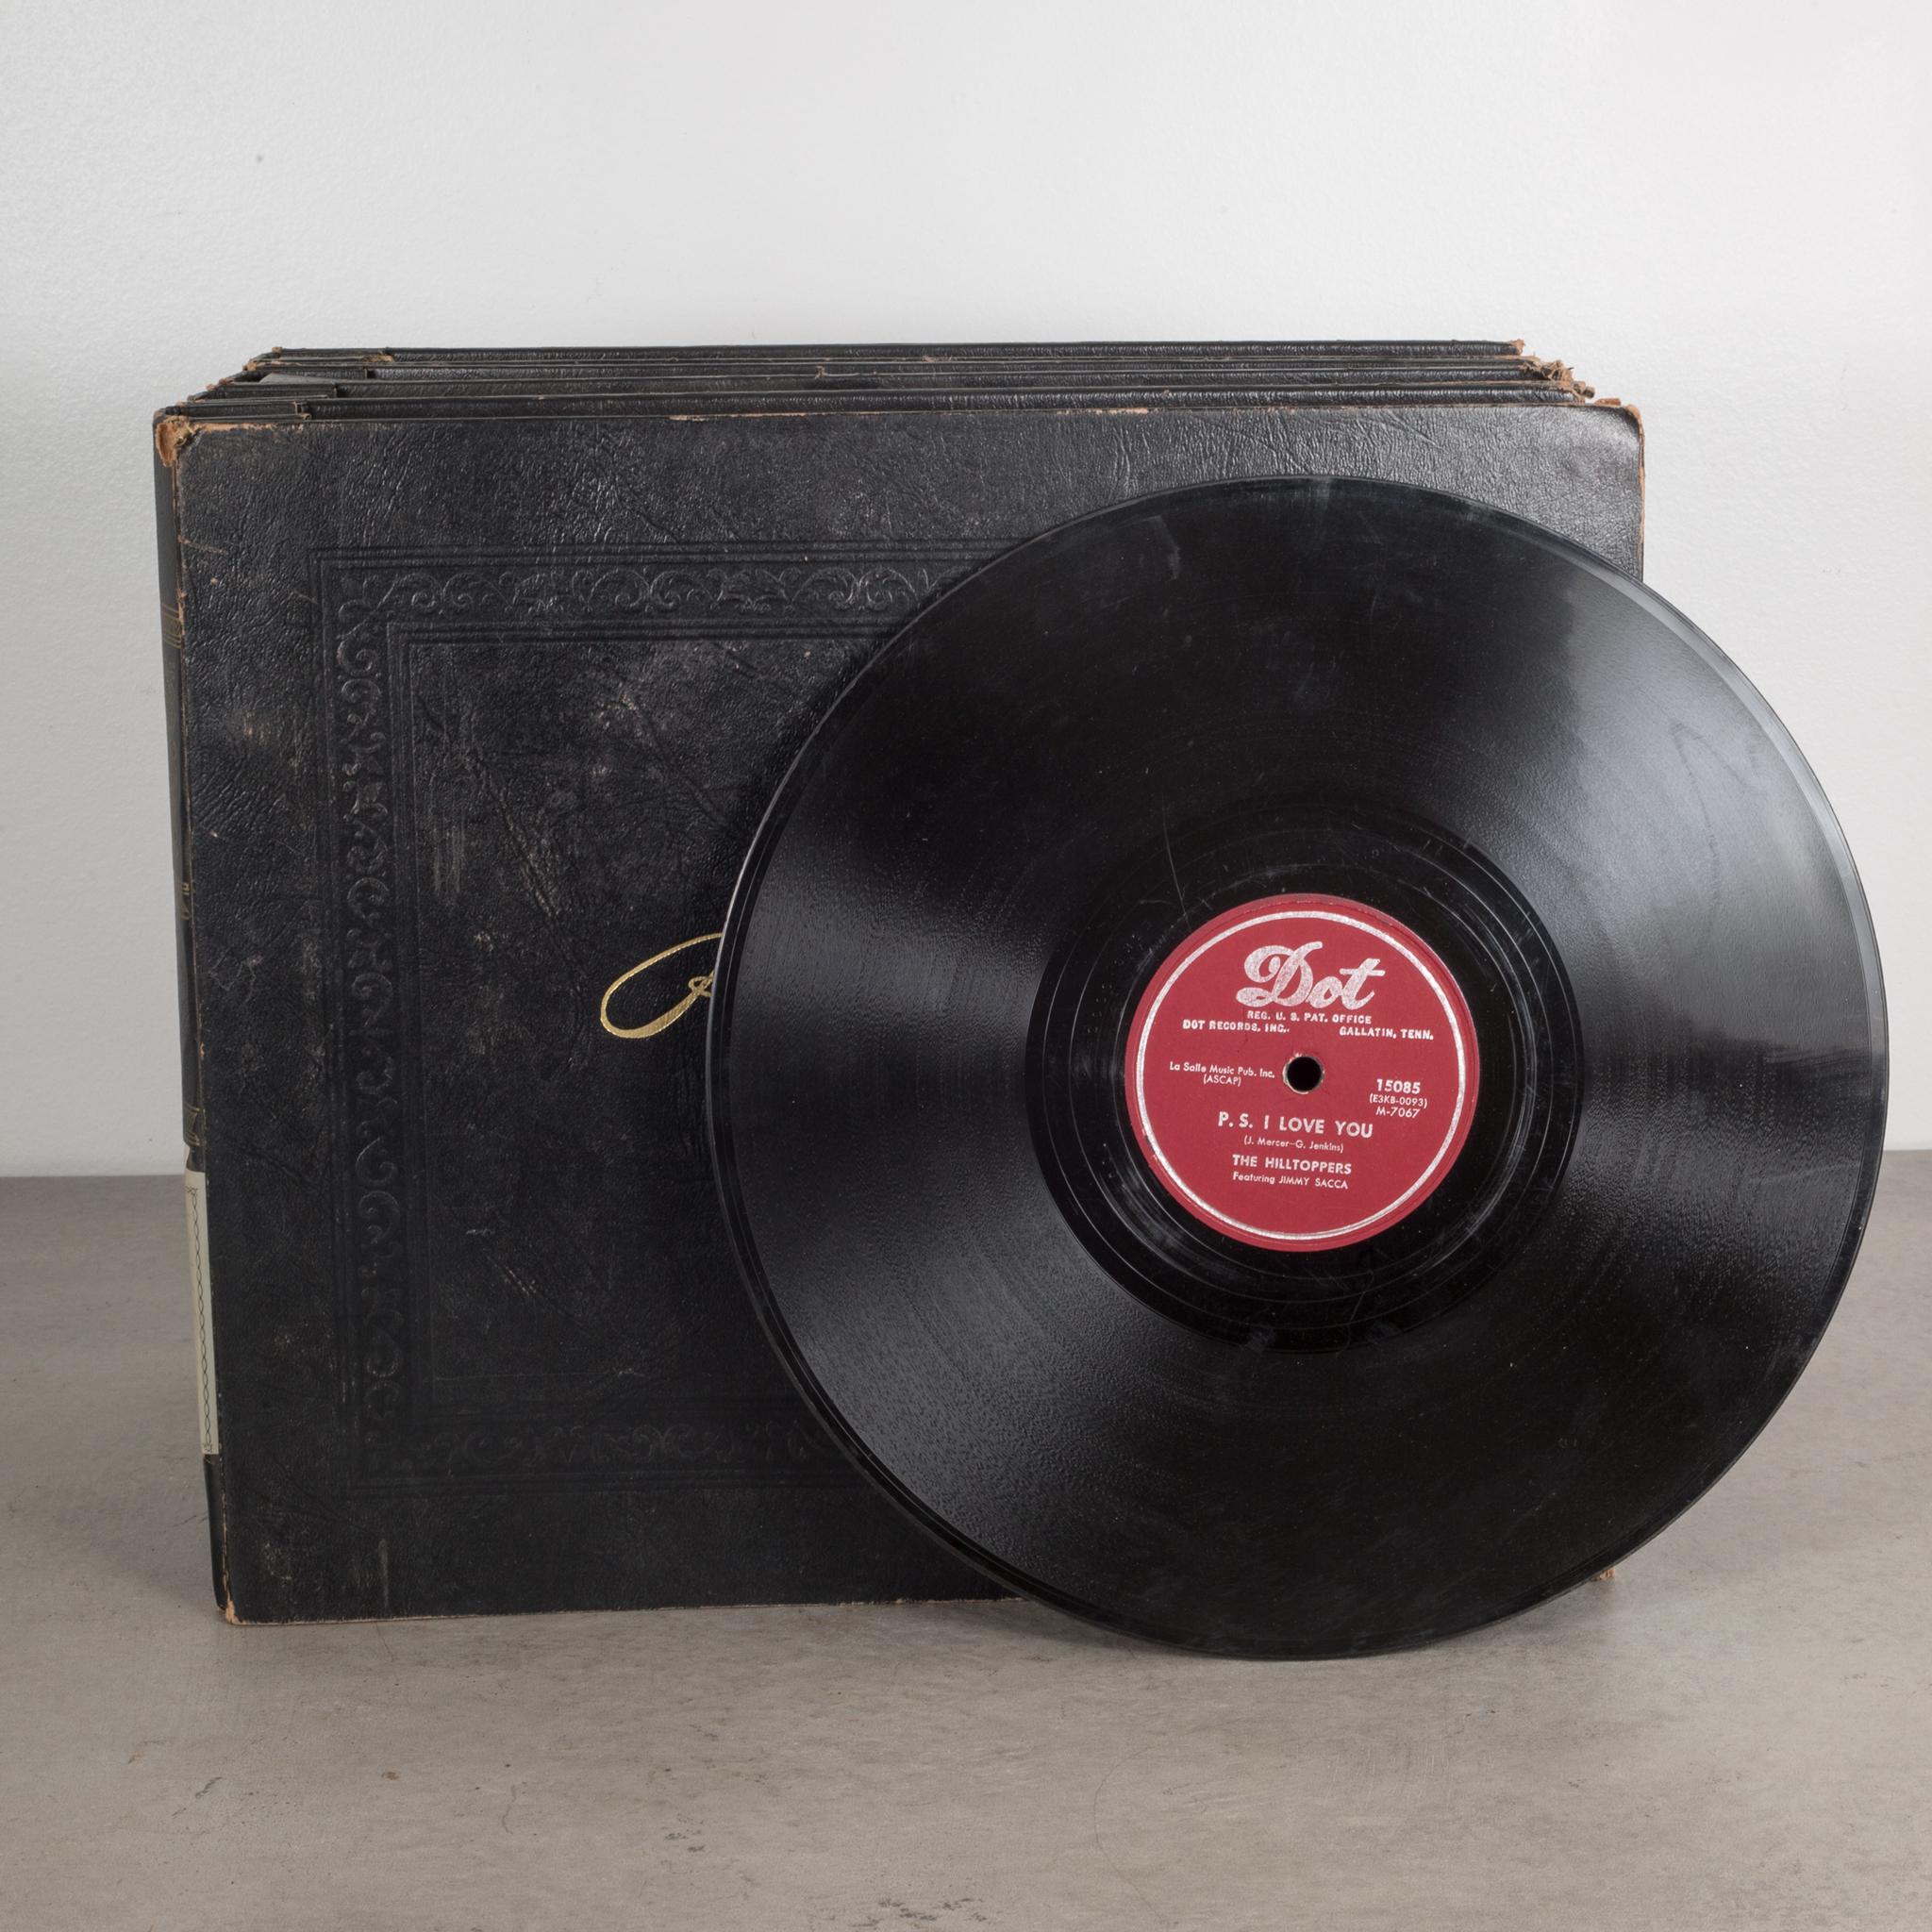 Industrial Set of Record Albums and Holders, circa 1940s-1950s